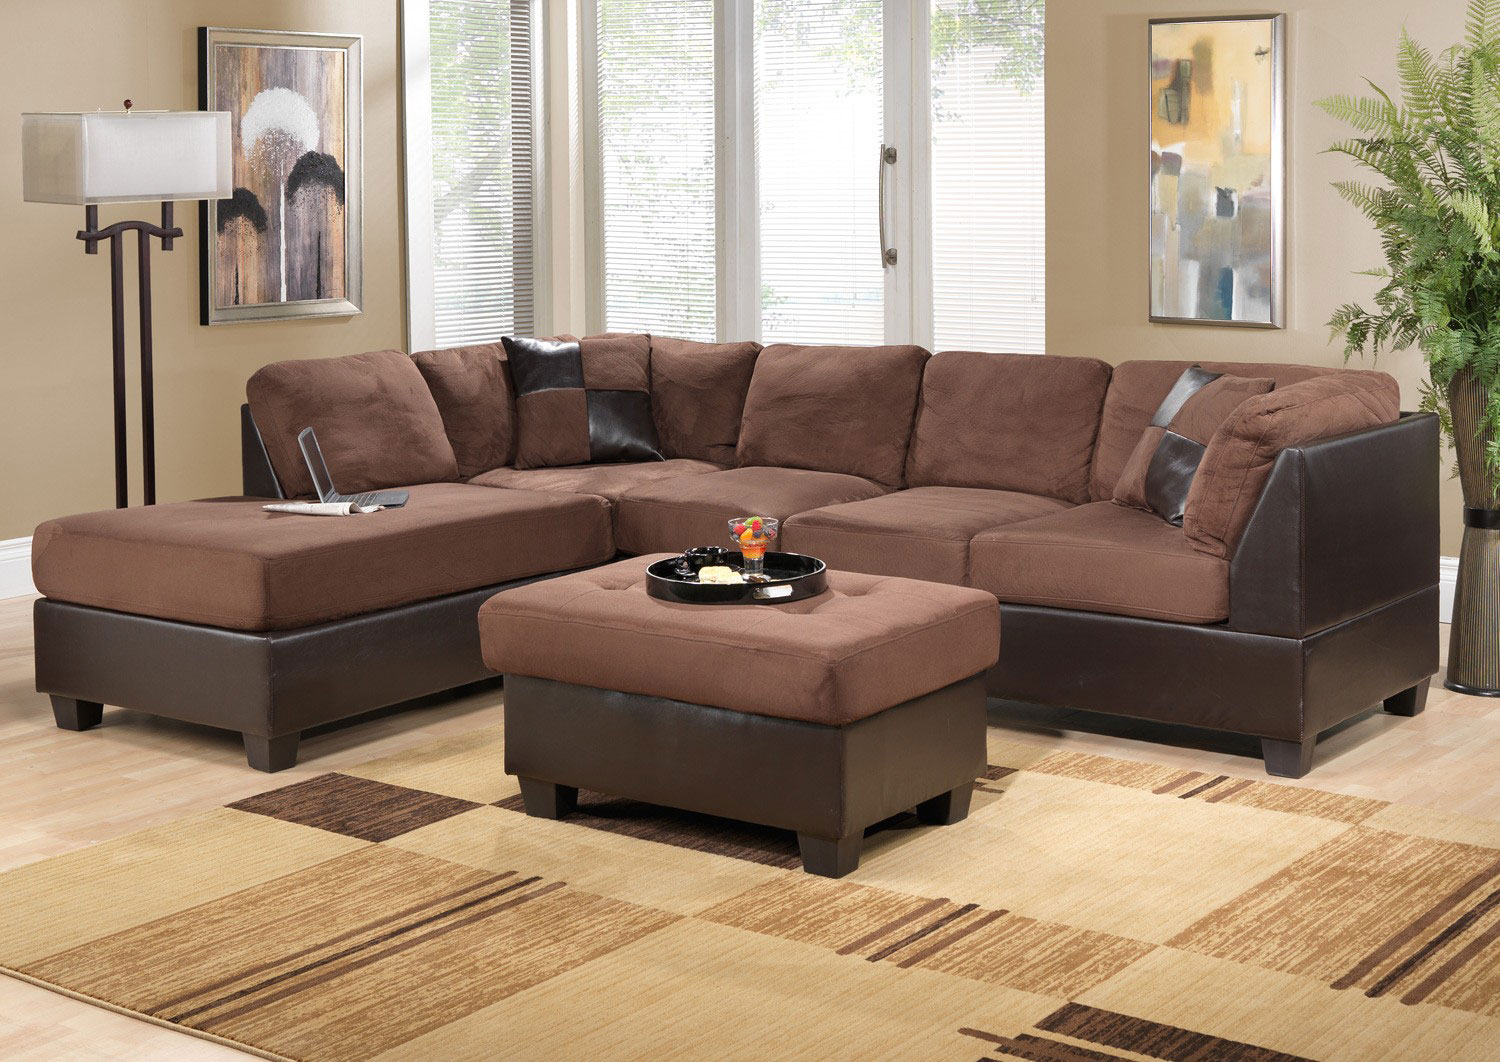 Sectional Sofa Living Breathtaking Sectional Sofa Bed In Living Room Furniture Sets Furnished With Soft Tufted Table On Rug And Completed With Flooring Stand Lamp Furniture The Best Living Room Furniture Sets